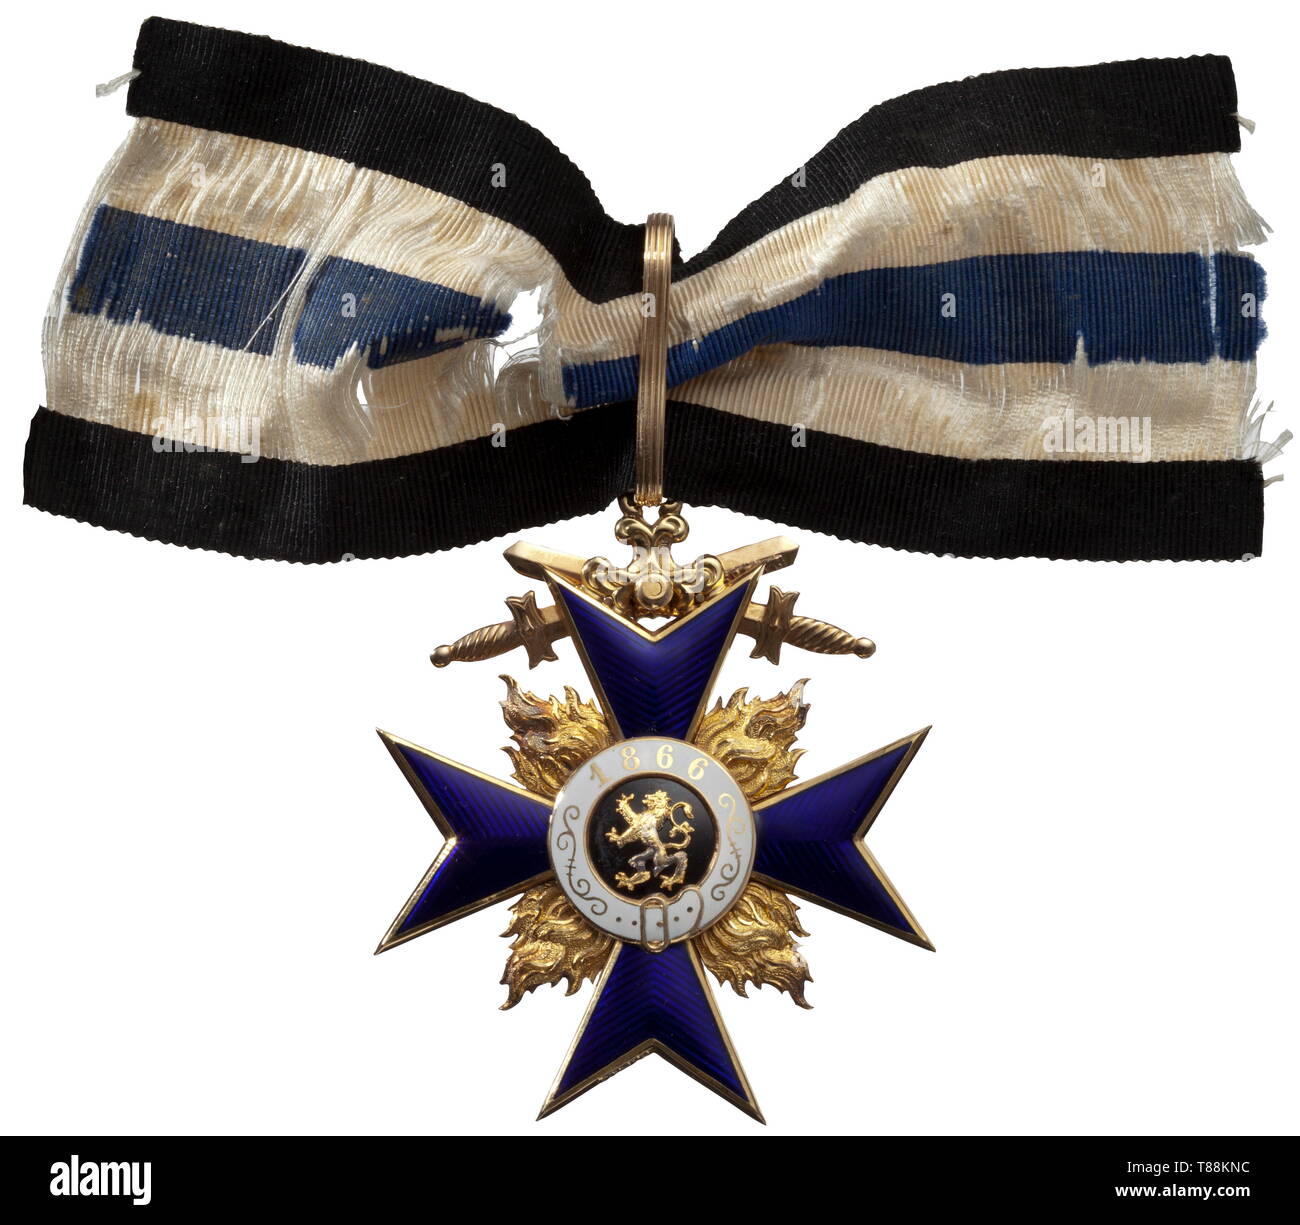 A Military Merit Order 2nd Class with Swords Cross of the order in gold from the second production series of the firm Weiss & Co in Munich (second half of the year 1916). The cross is made of 18-carat gold and is marked '750 W.C.' in the lower cross arm. The '585' on the suspension ring and '585 W.C.' on the swords indicate the lesser purity was employed for reasons of stability. Over an uncertain period of time, the Weiss firm supplied 50 examples to the office of the High Chancellor, which are counted among the finest and most beautiful technic, Additional-Rights-Clearance-Info-Not-Available Stock Photo